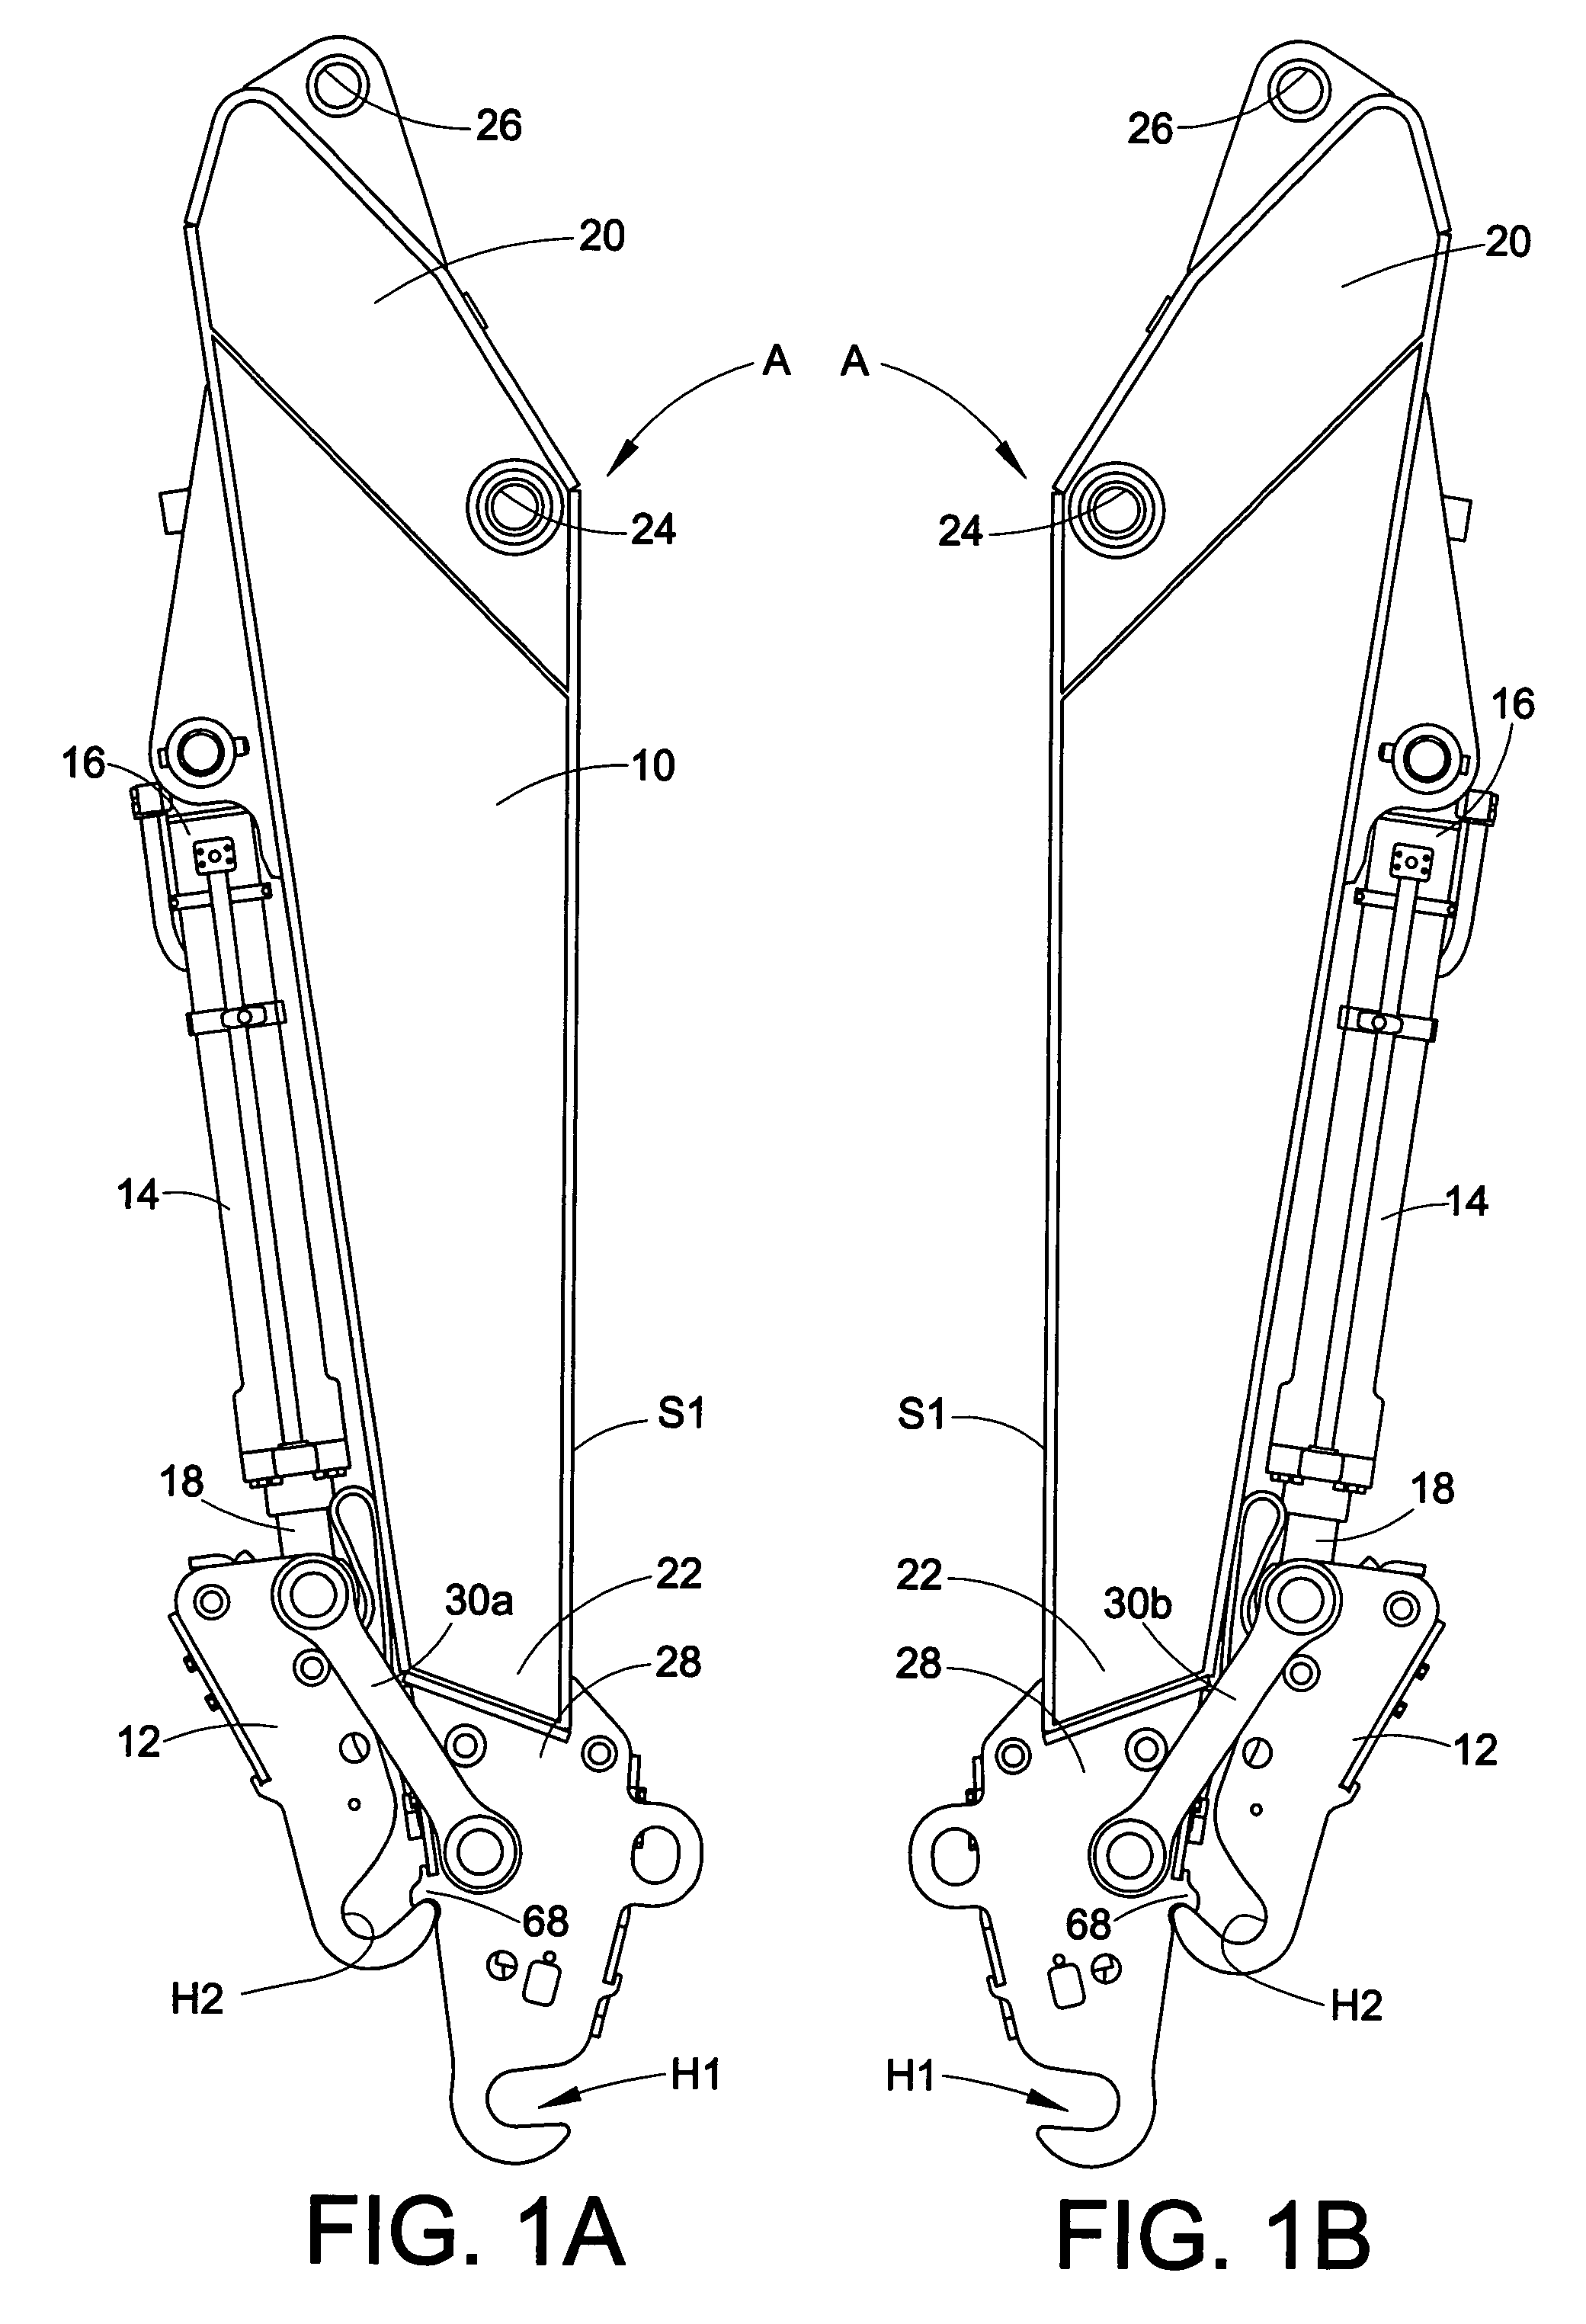 Arm assembly for excavation apparatus and method of using same